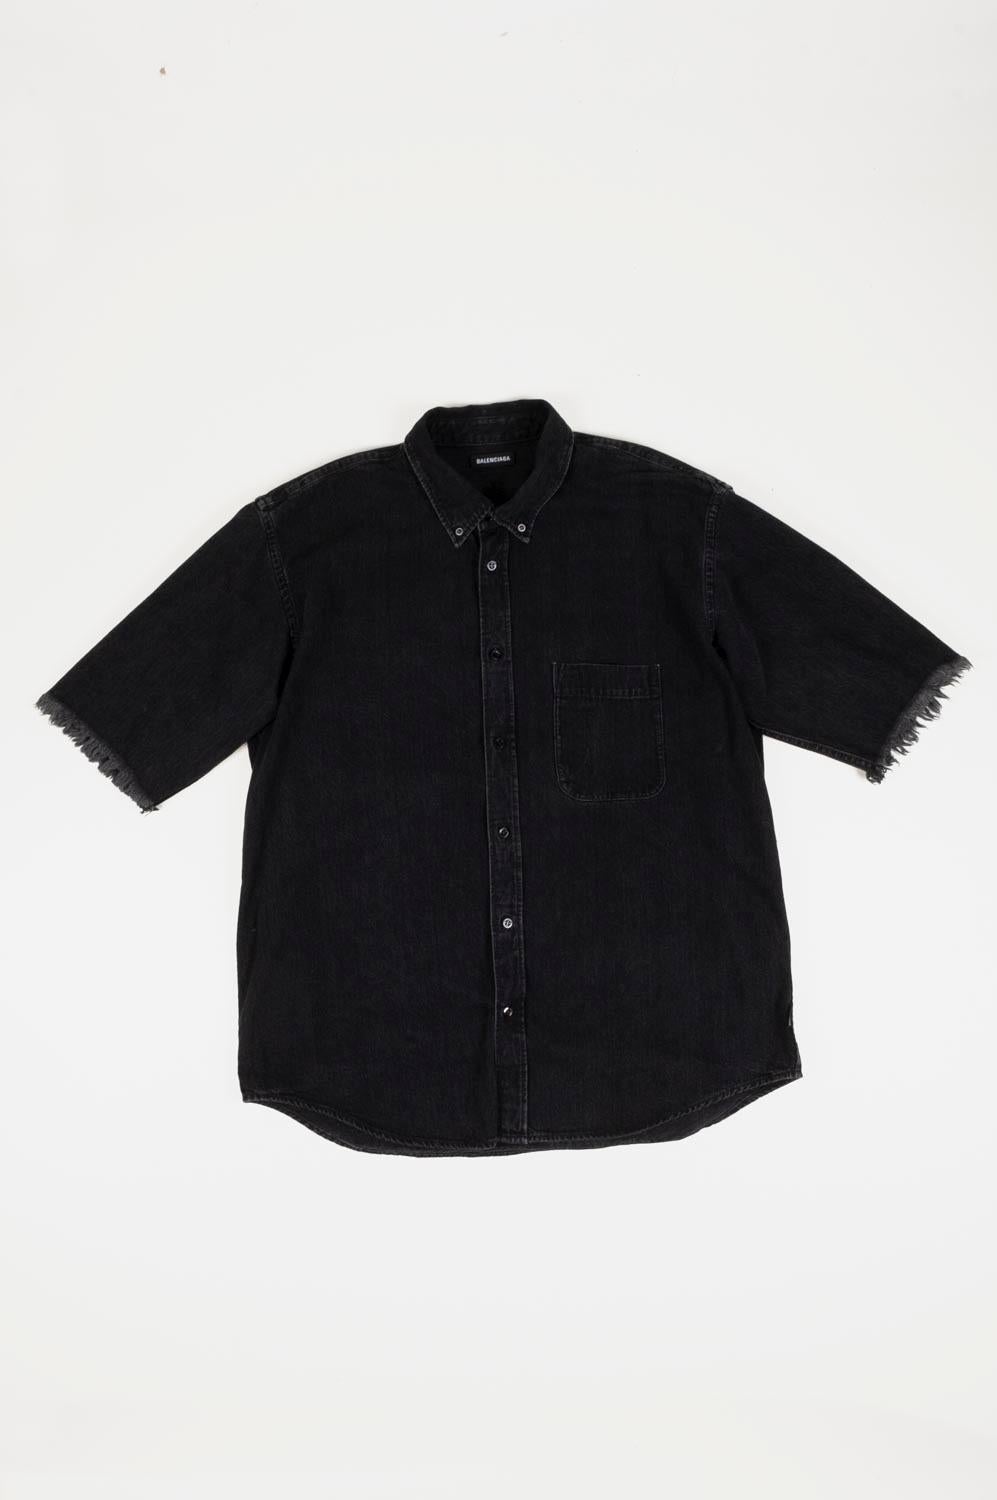 Item for sale is 100% genuine Balenciaga Short Sleeves Denim Men Shirt, S478
Color: Dark Grey
(An actual color may a bit vary due to individual computer screen interpretation)
Material: Cotton
Tag size: 40 runs L/XL
This shirt is great quality item.